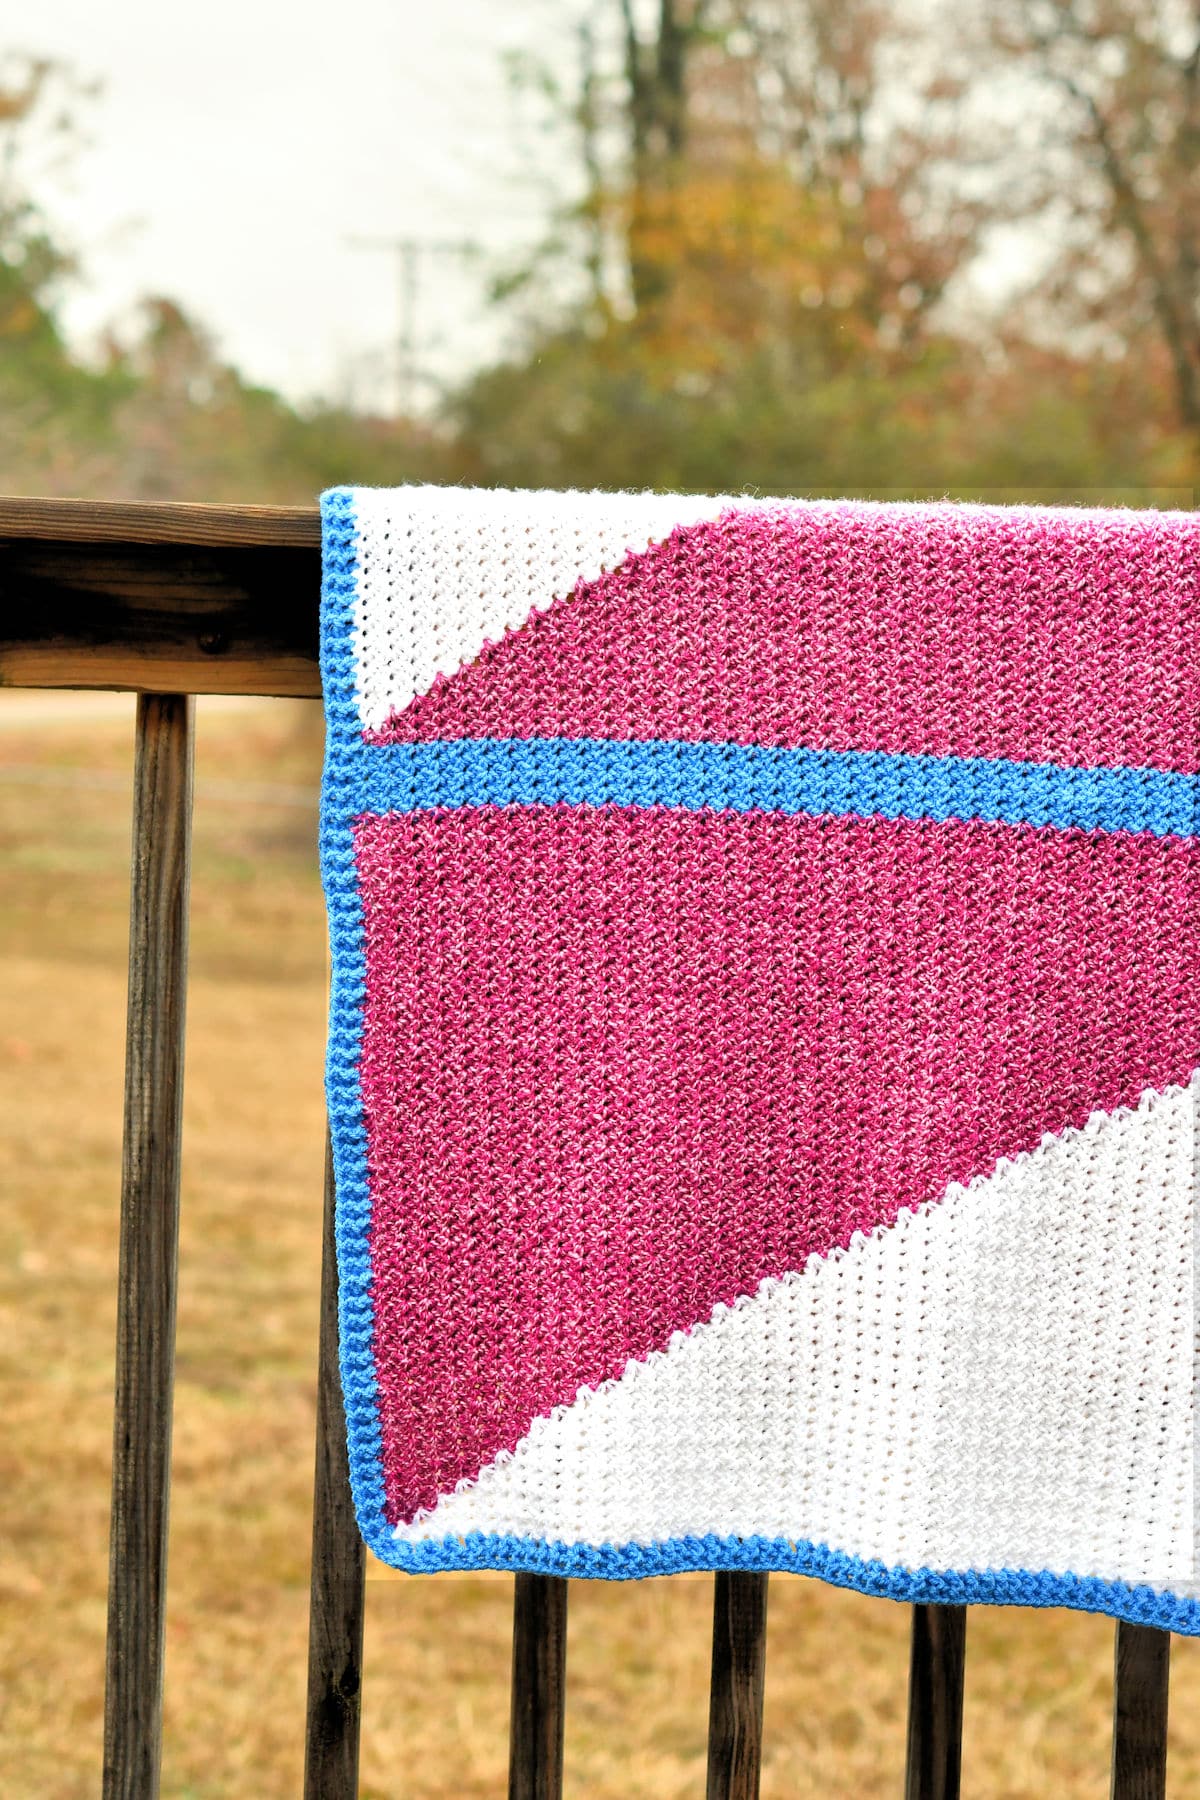 Modern Crochet Baby Blanket displayed outdoors on a railing